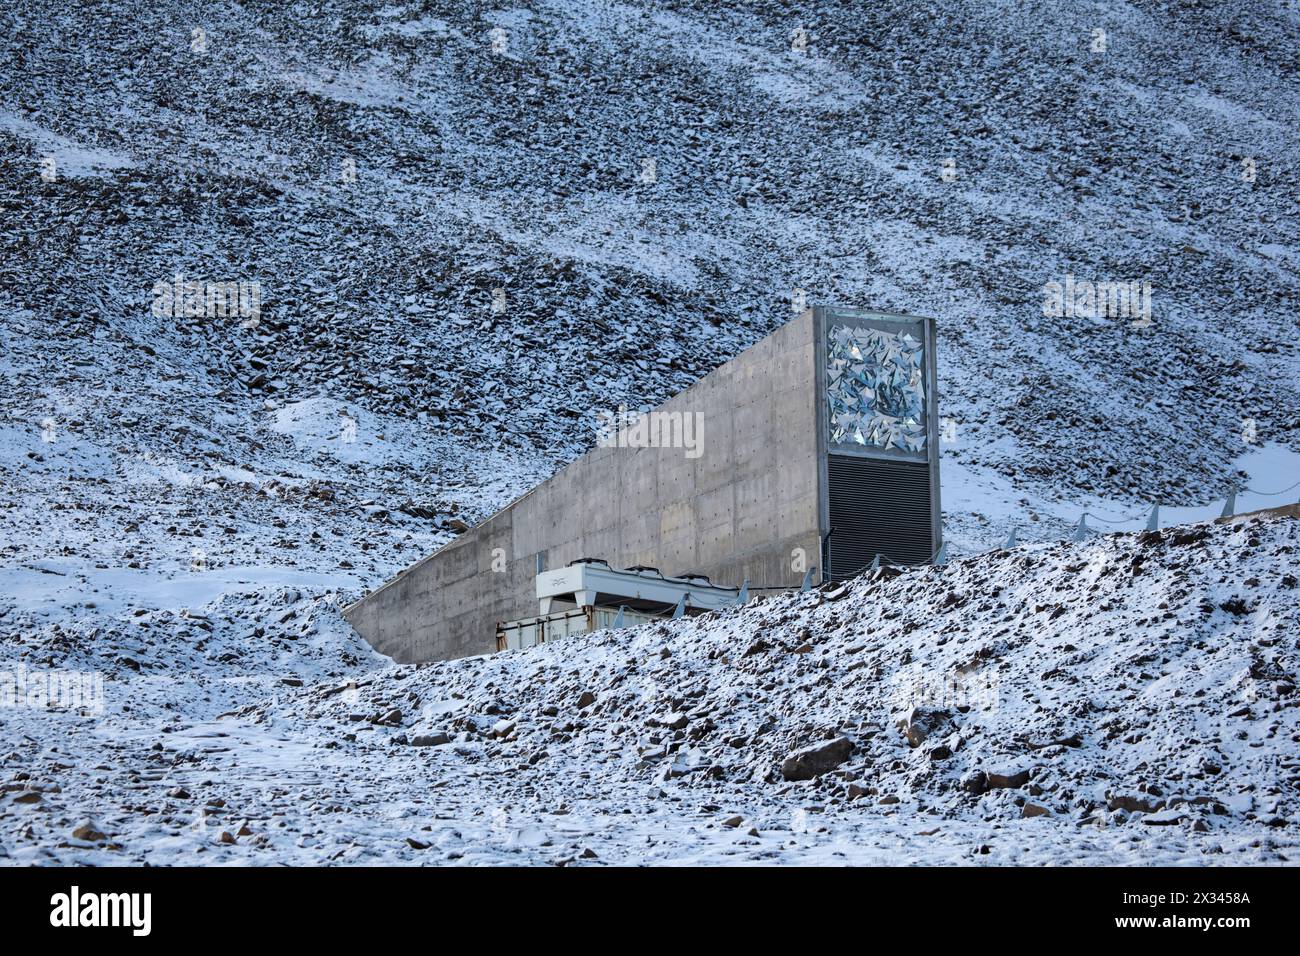 Nestled into the rocky waste of plataberget Mountain about Svalbard's airport, the Global Seed Vault is at once startling and innocuous. Designed by a Stock Photo